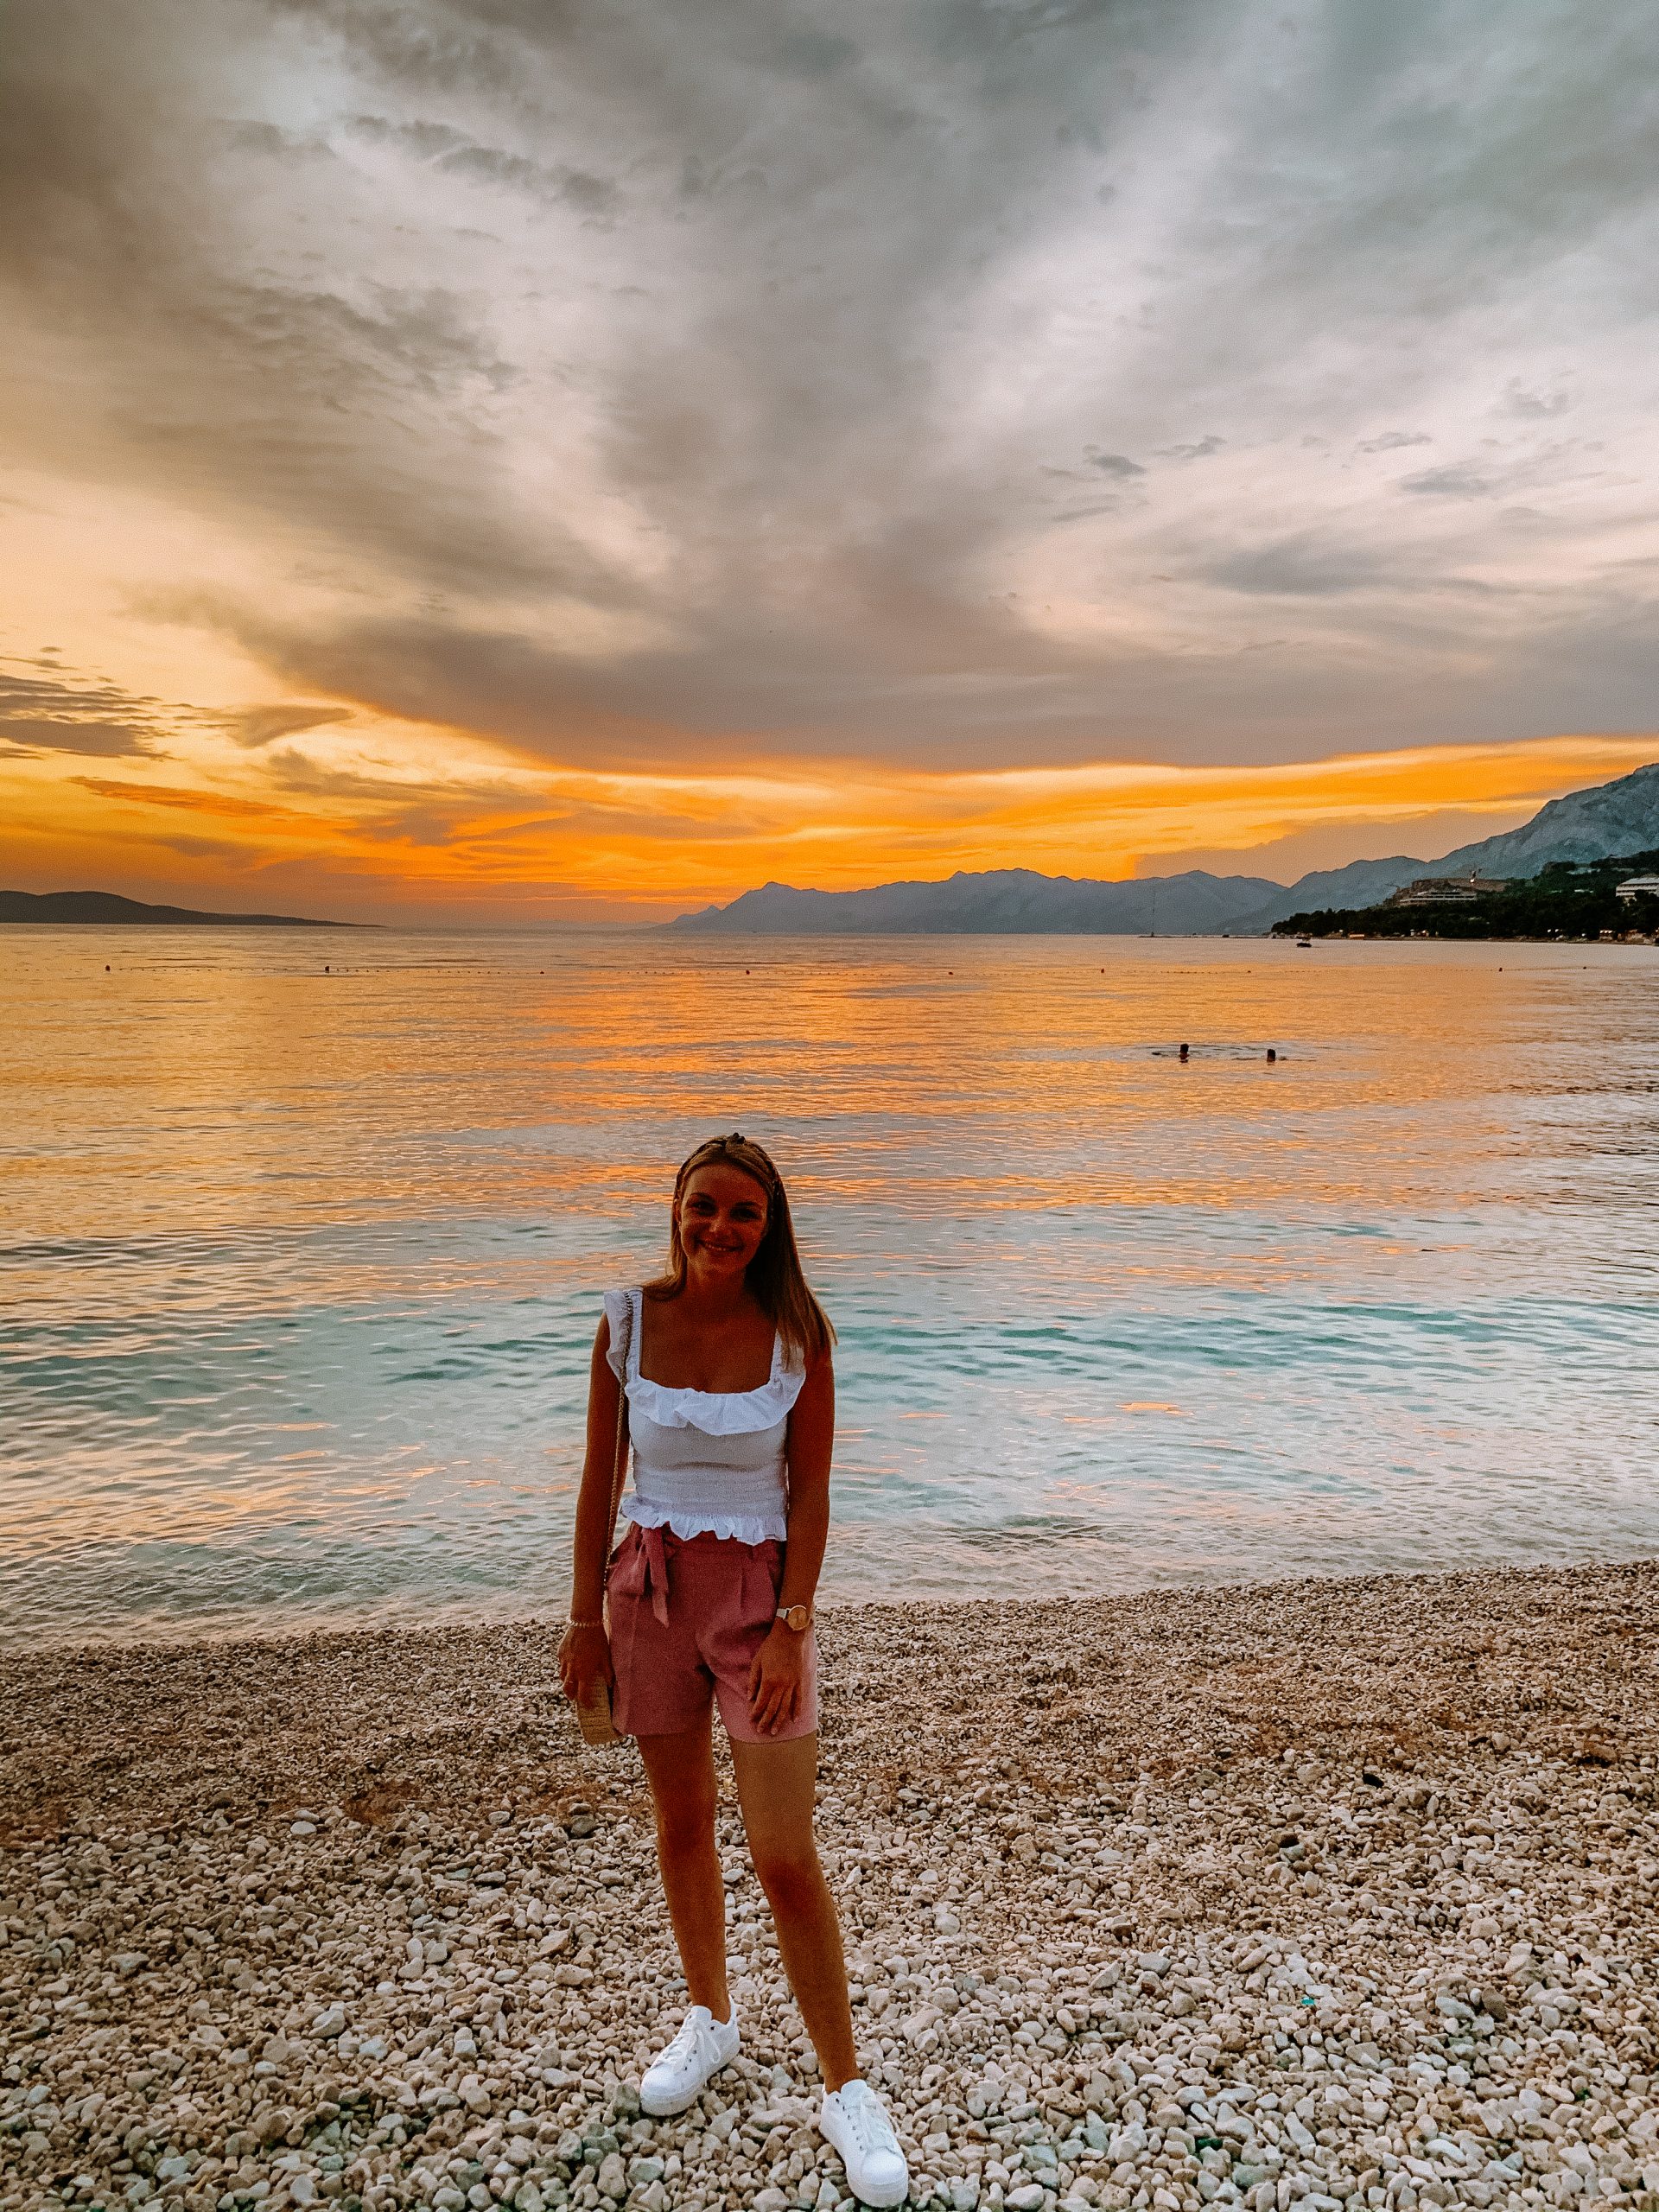 A woman stood on a pebbly beach with the sunset in the background